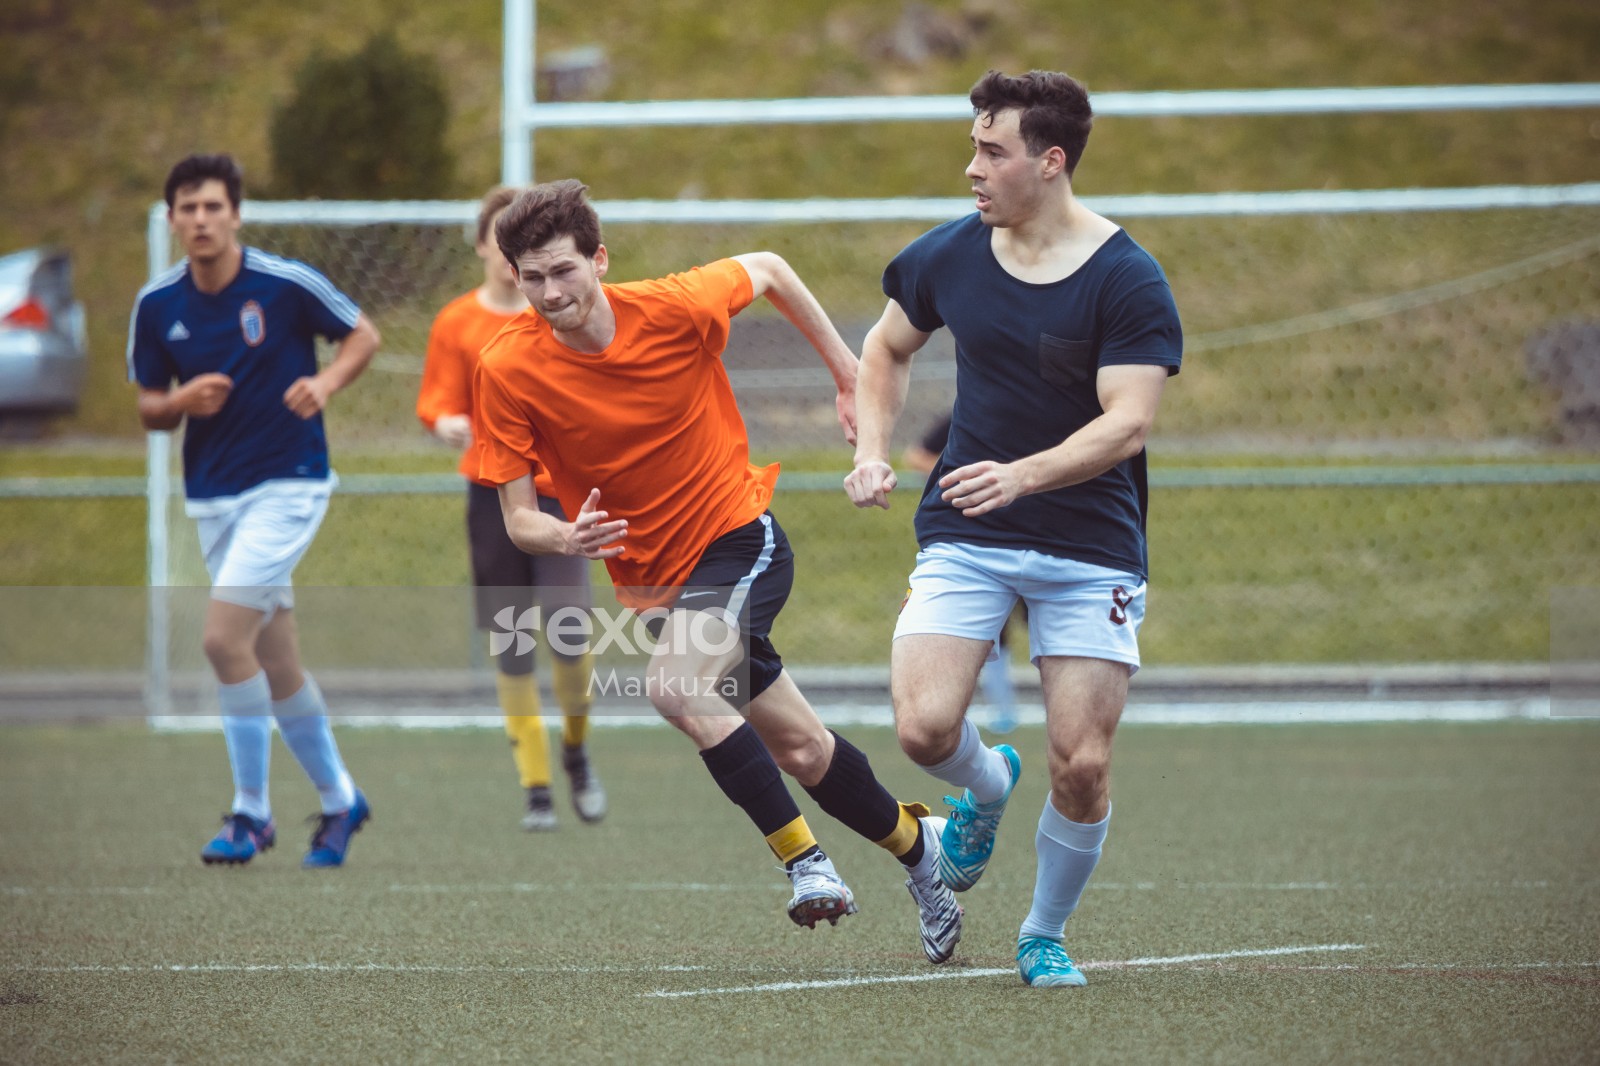 Football players dashing in orange and black shirts - Sports Zone sunday league